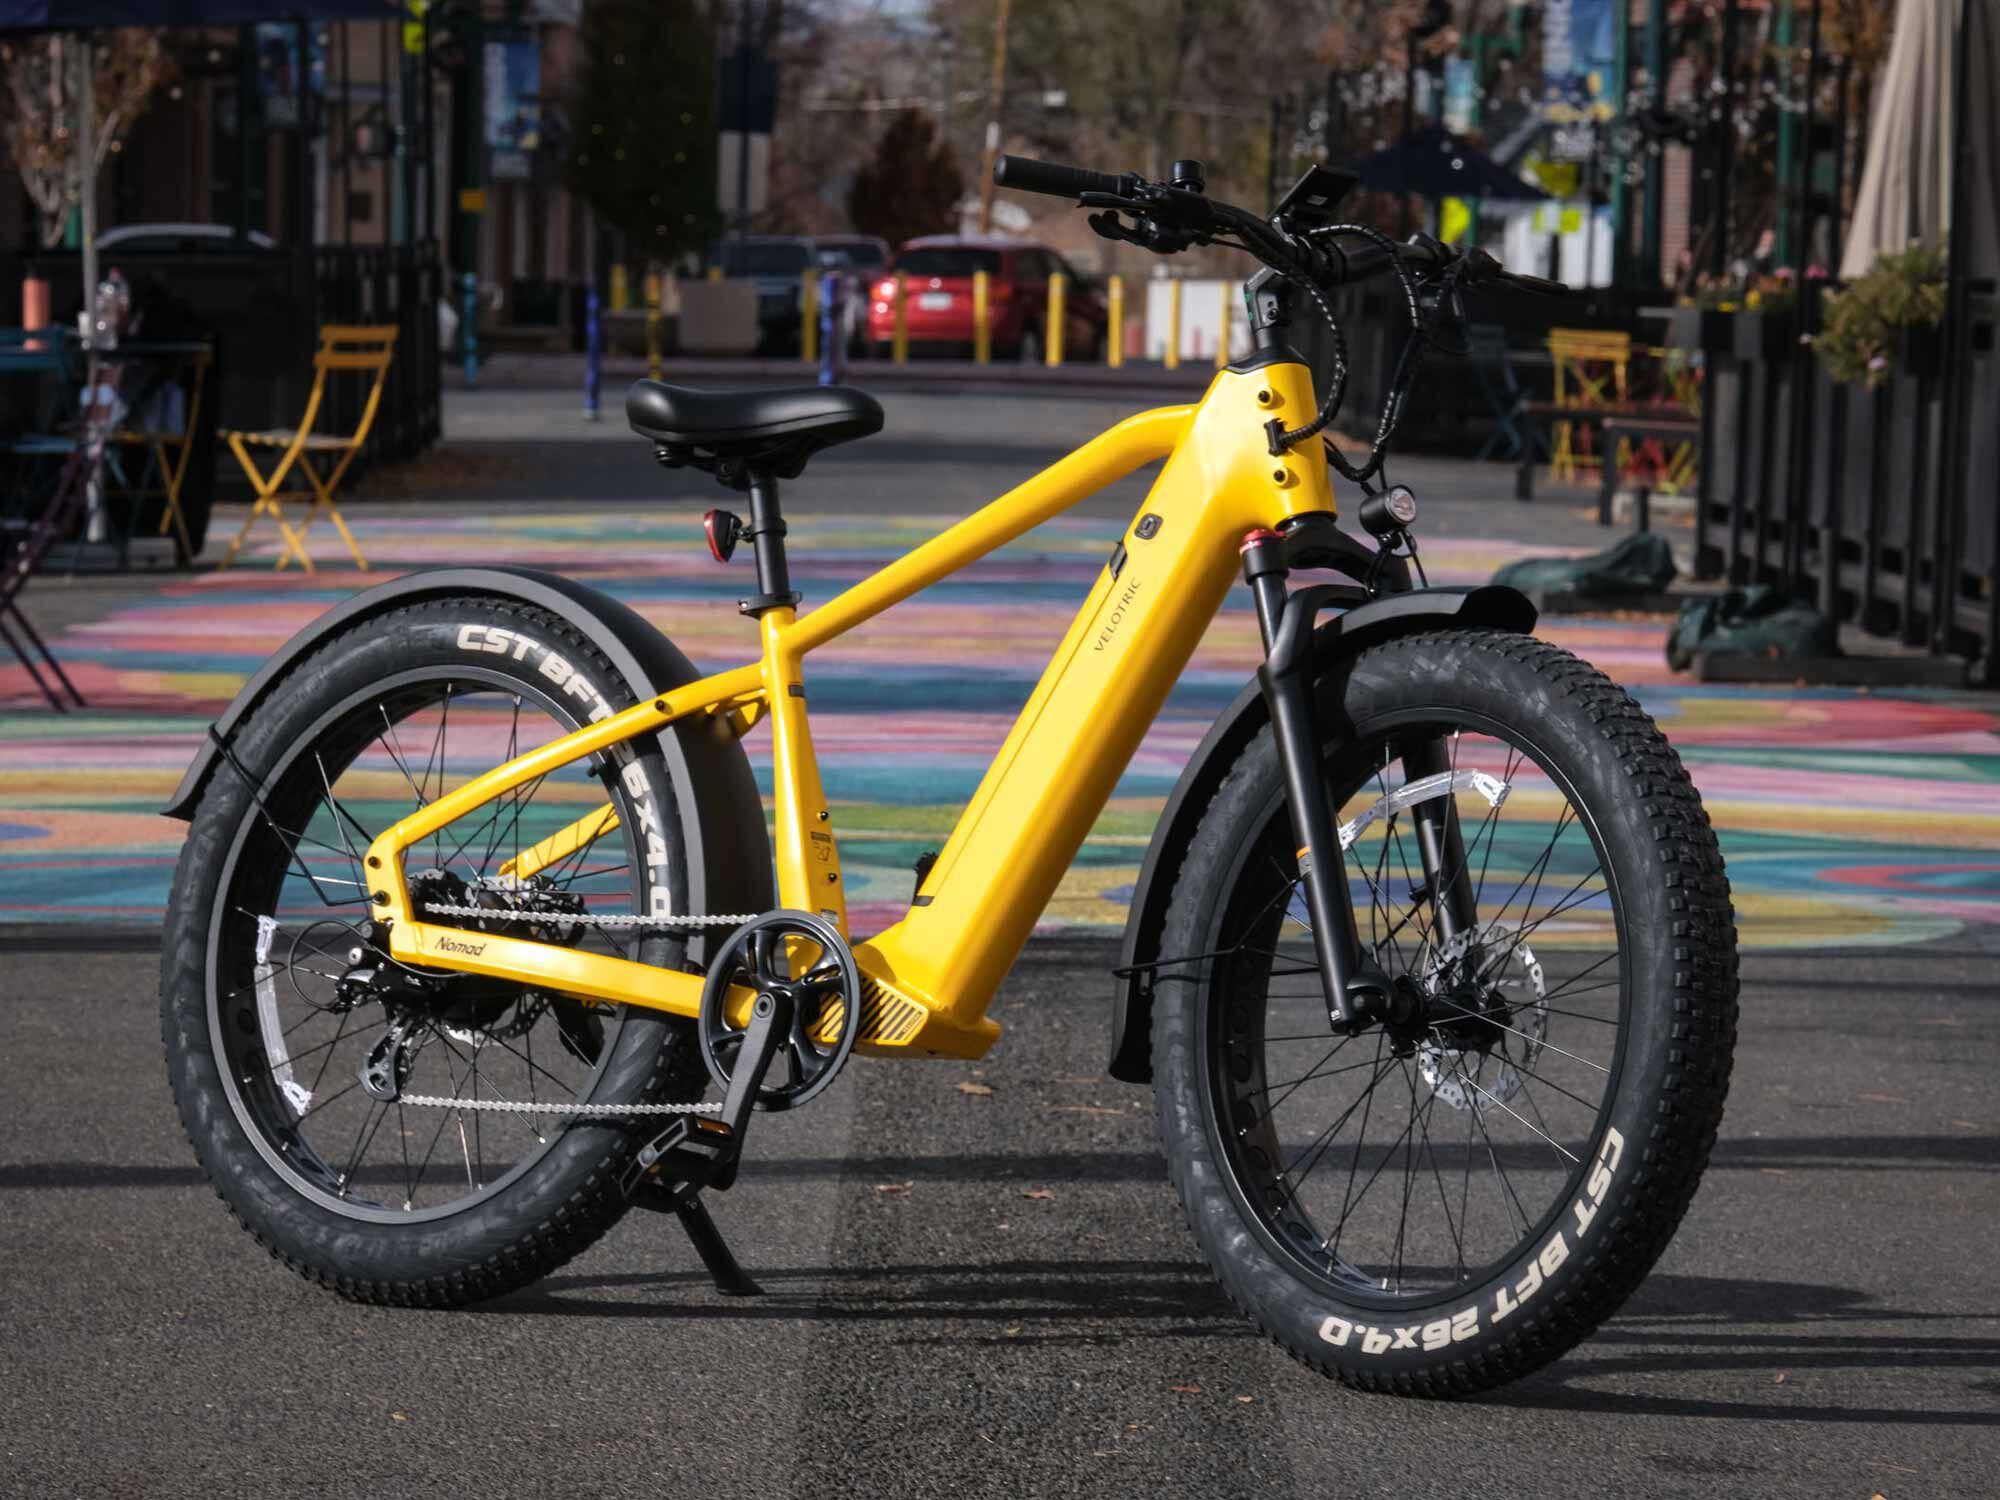 Just about everything is big about the Velotric Nomad 1, starting with its 4-inch-wide fat tires.